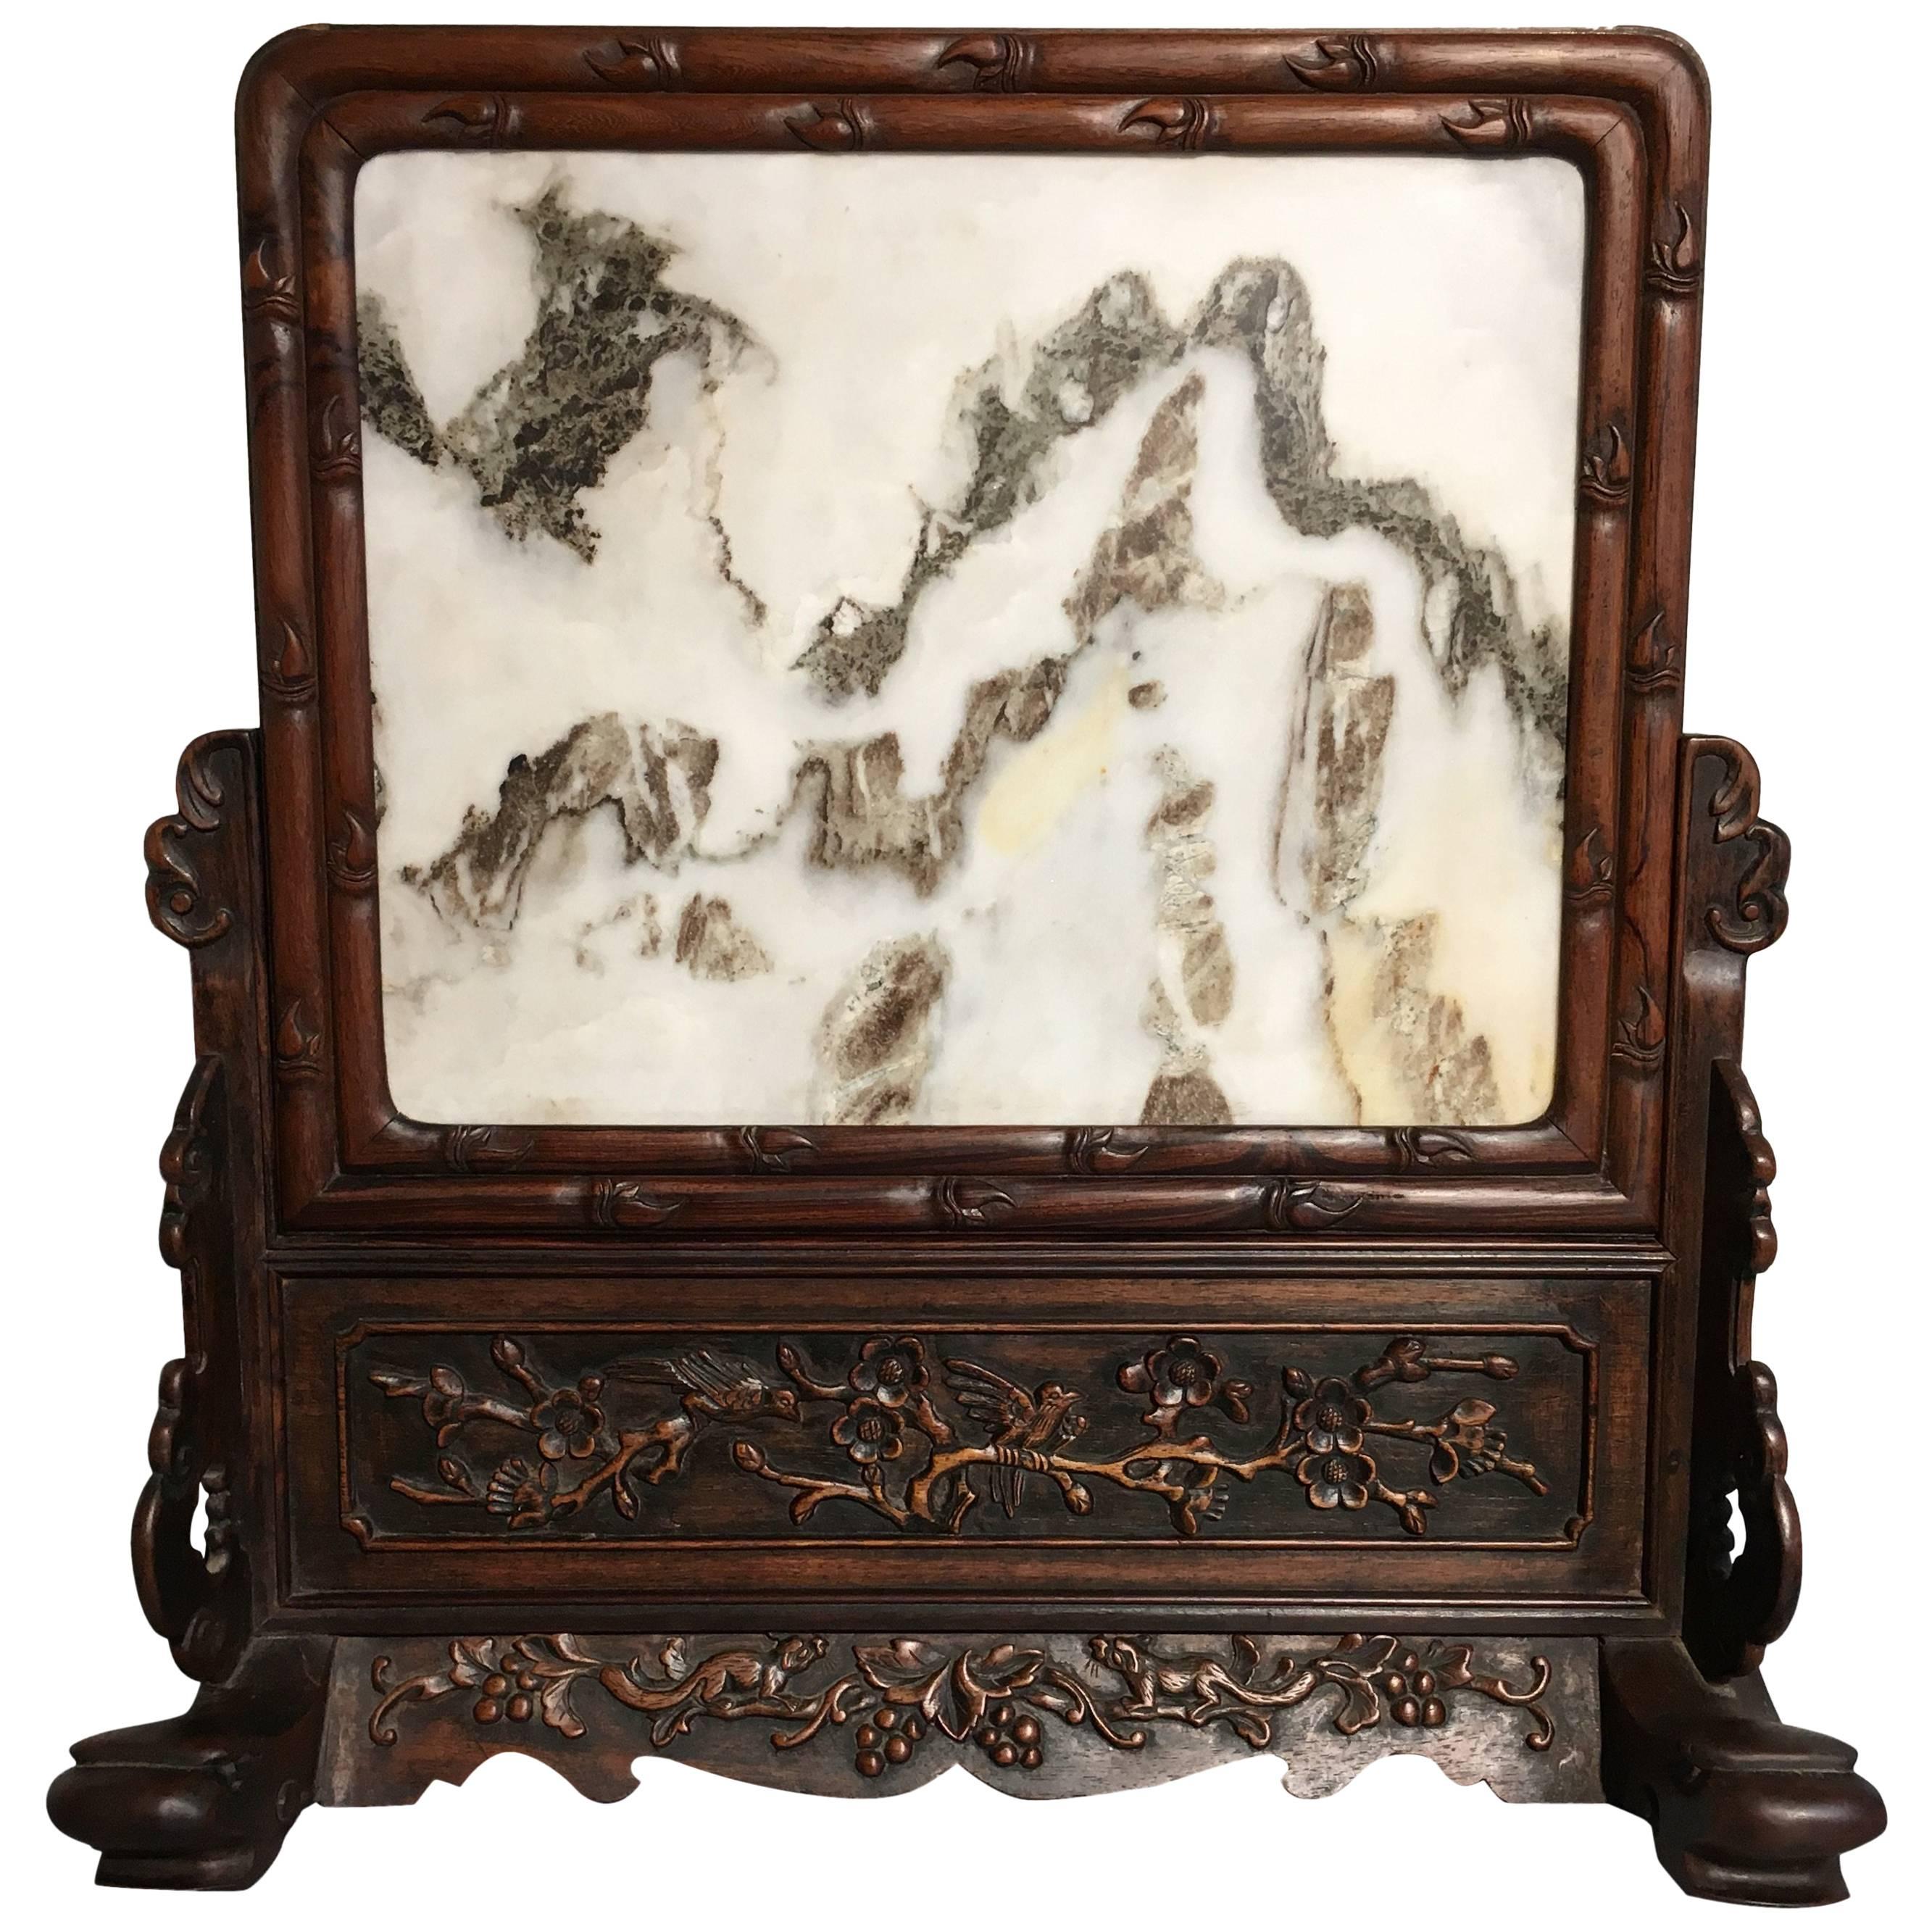 Chinese Dream Stone and Hardwood Table Screen, Republic Period